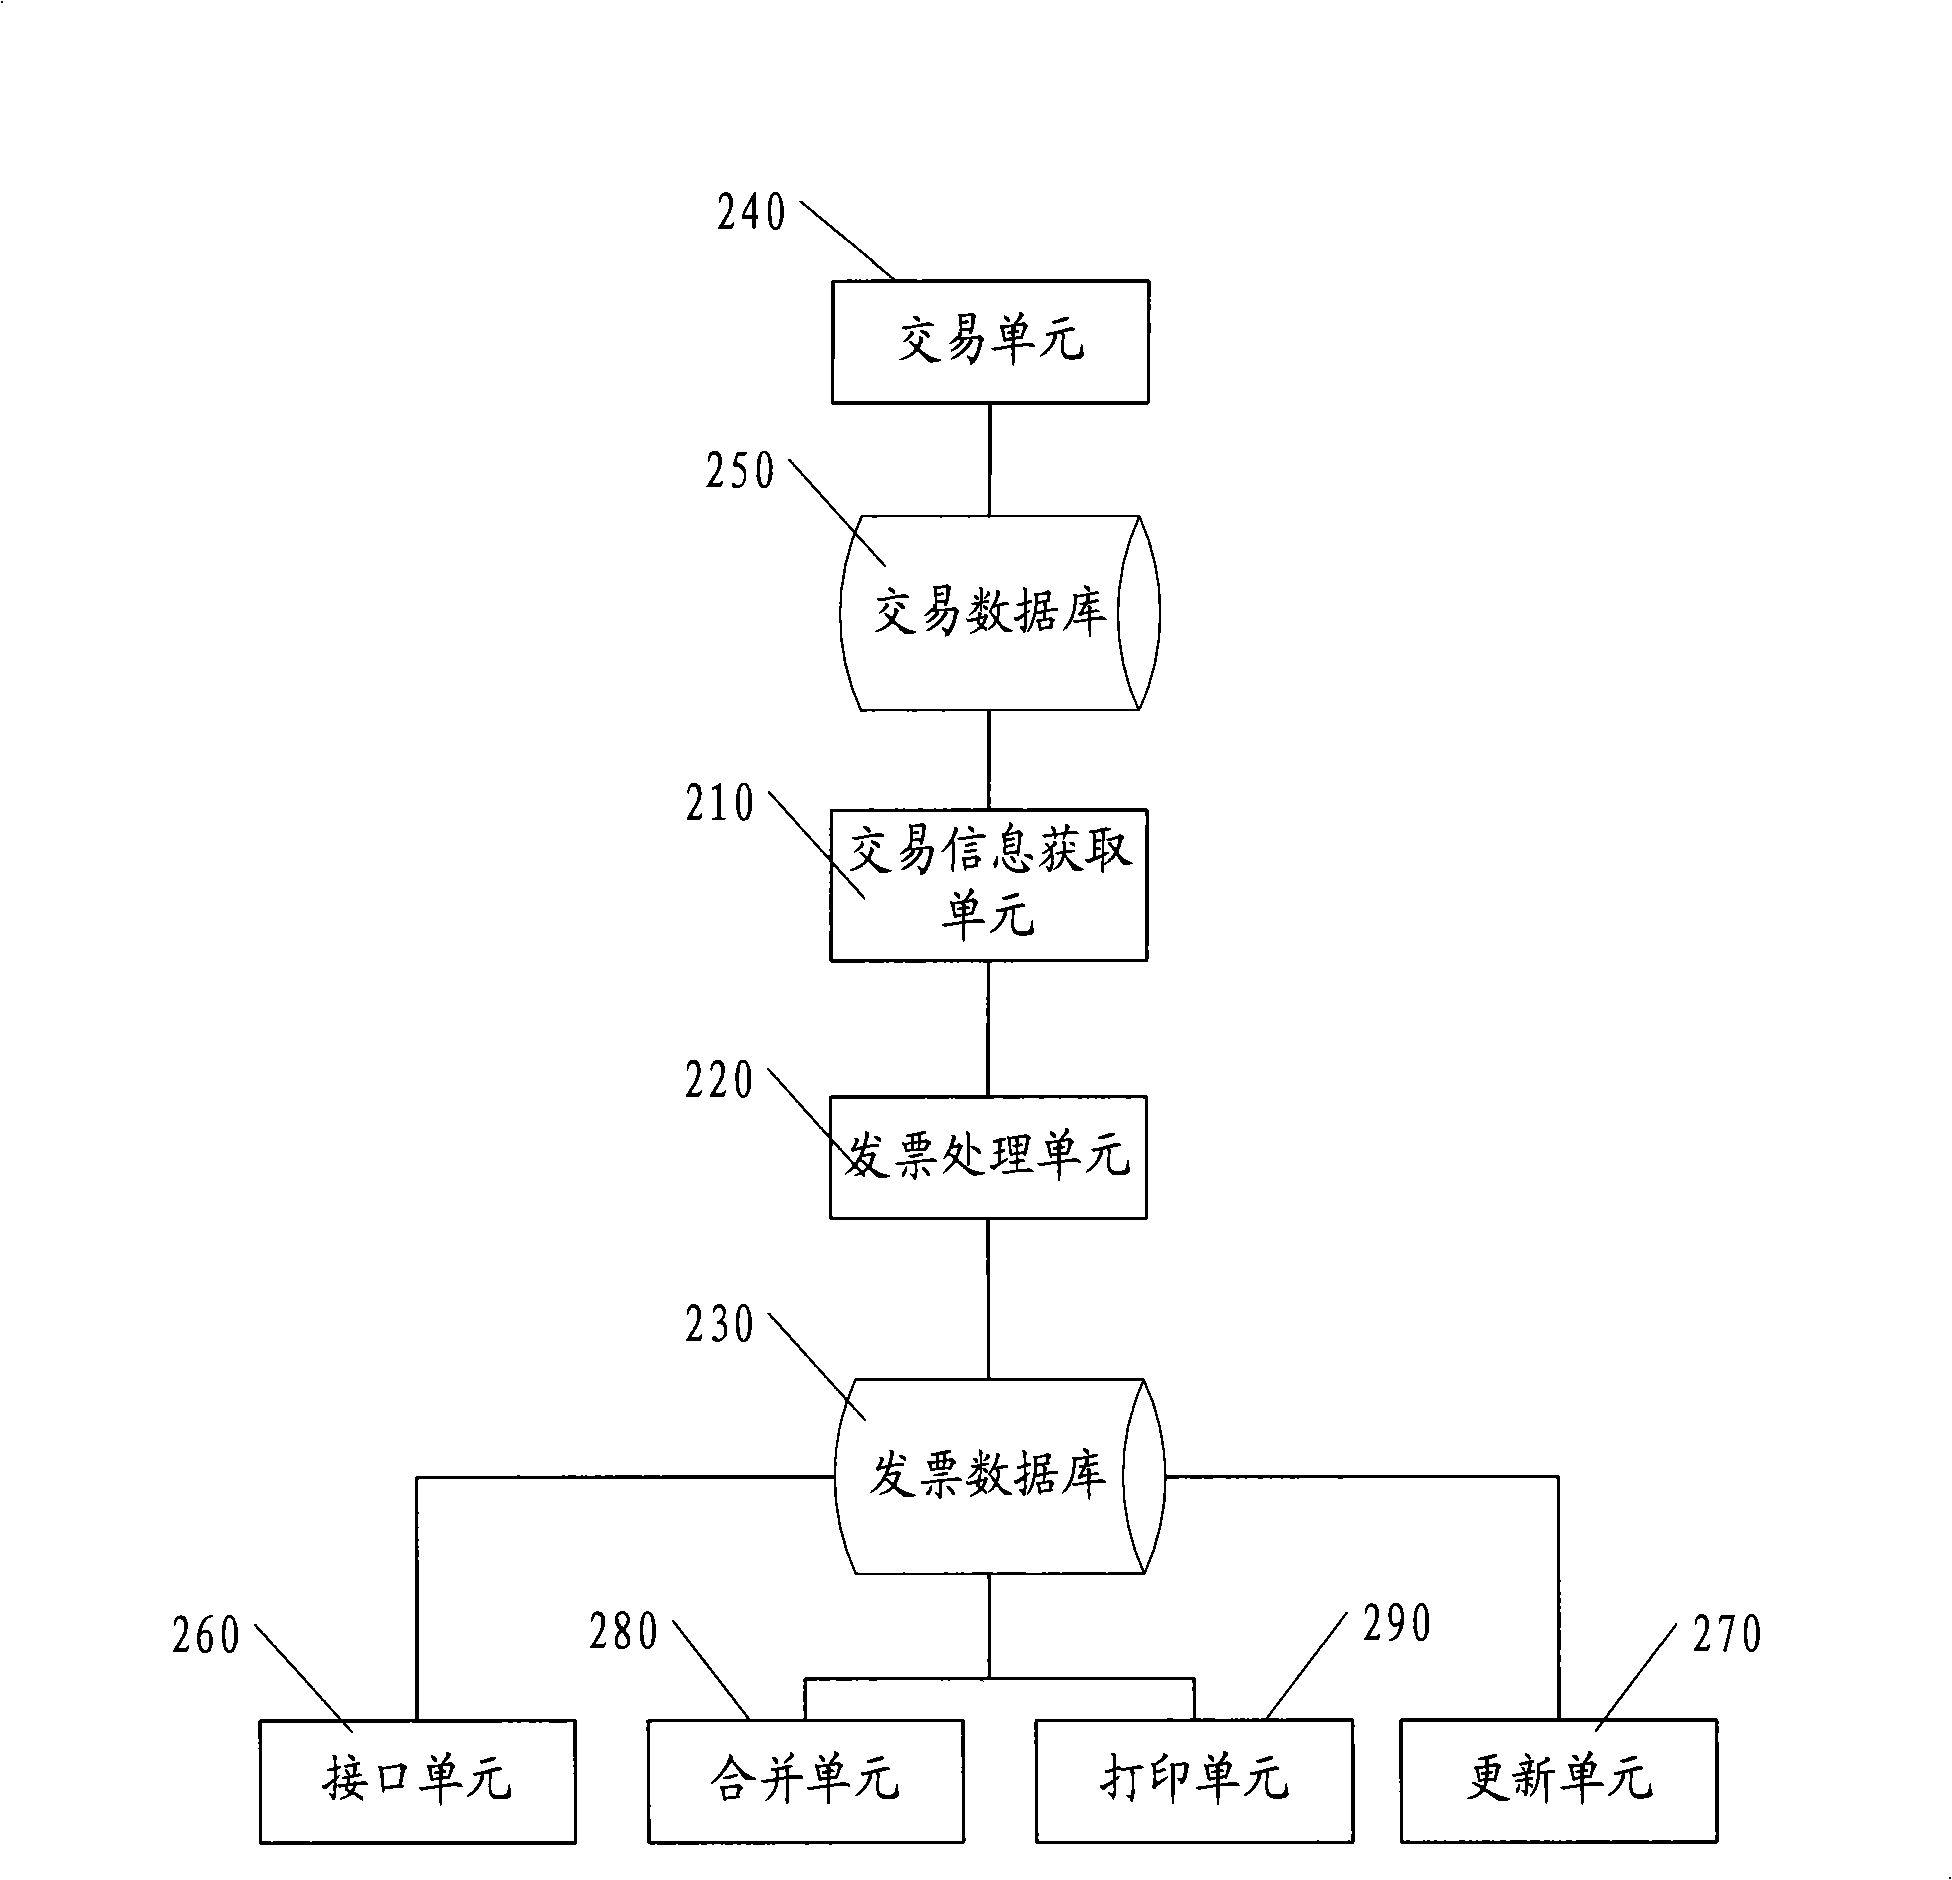 Receipt processing system and method based on internet trade